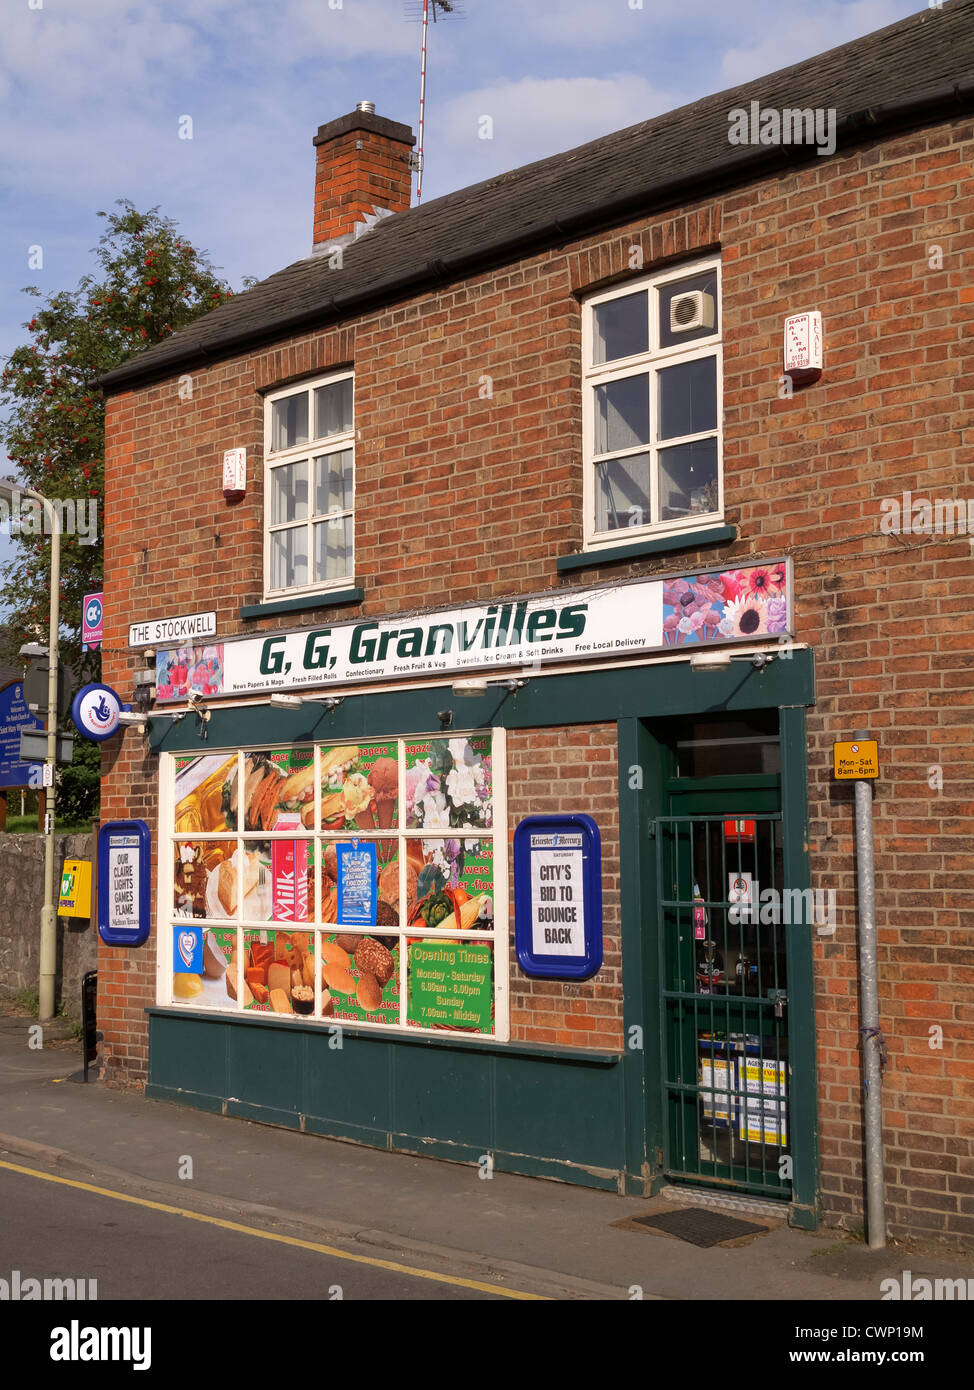 Amusing shop sign inspired by TV series 'Open All Hours' where Ronnie Barker stutters his corner shop assistant's name Granville Stock Photo